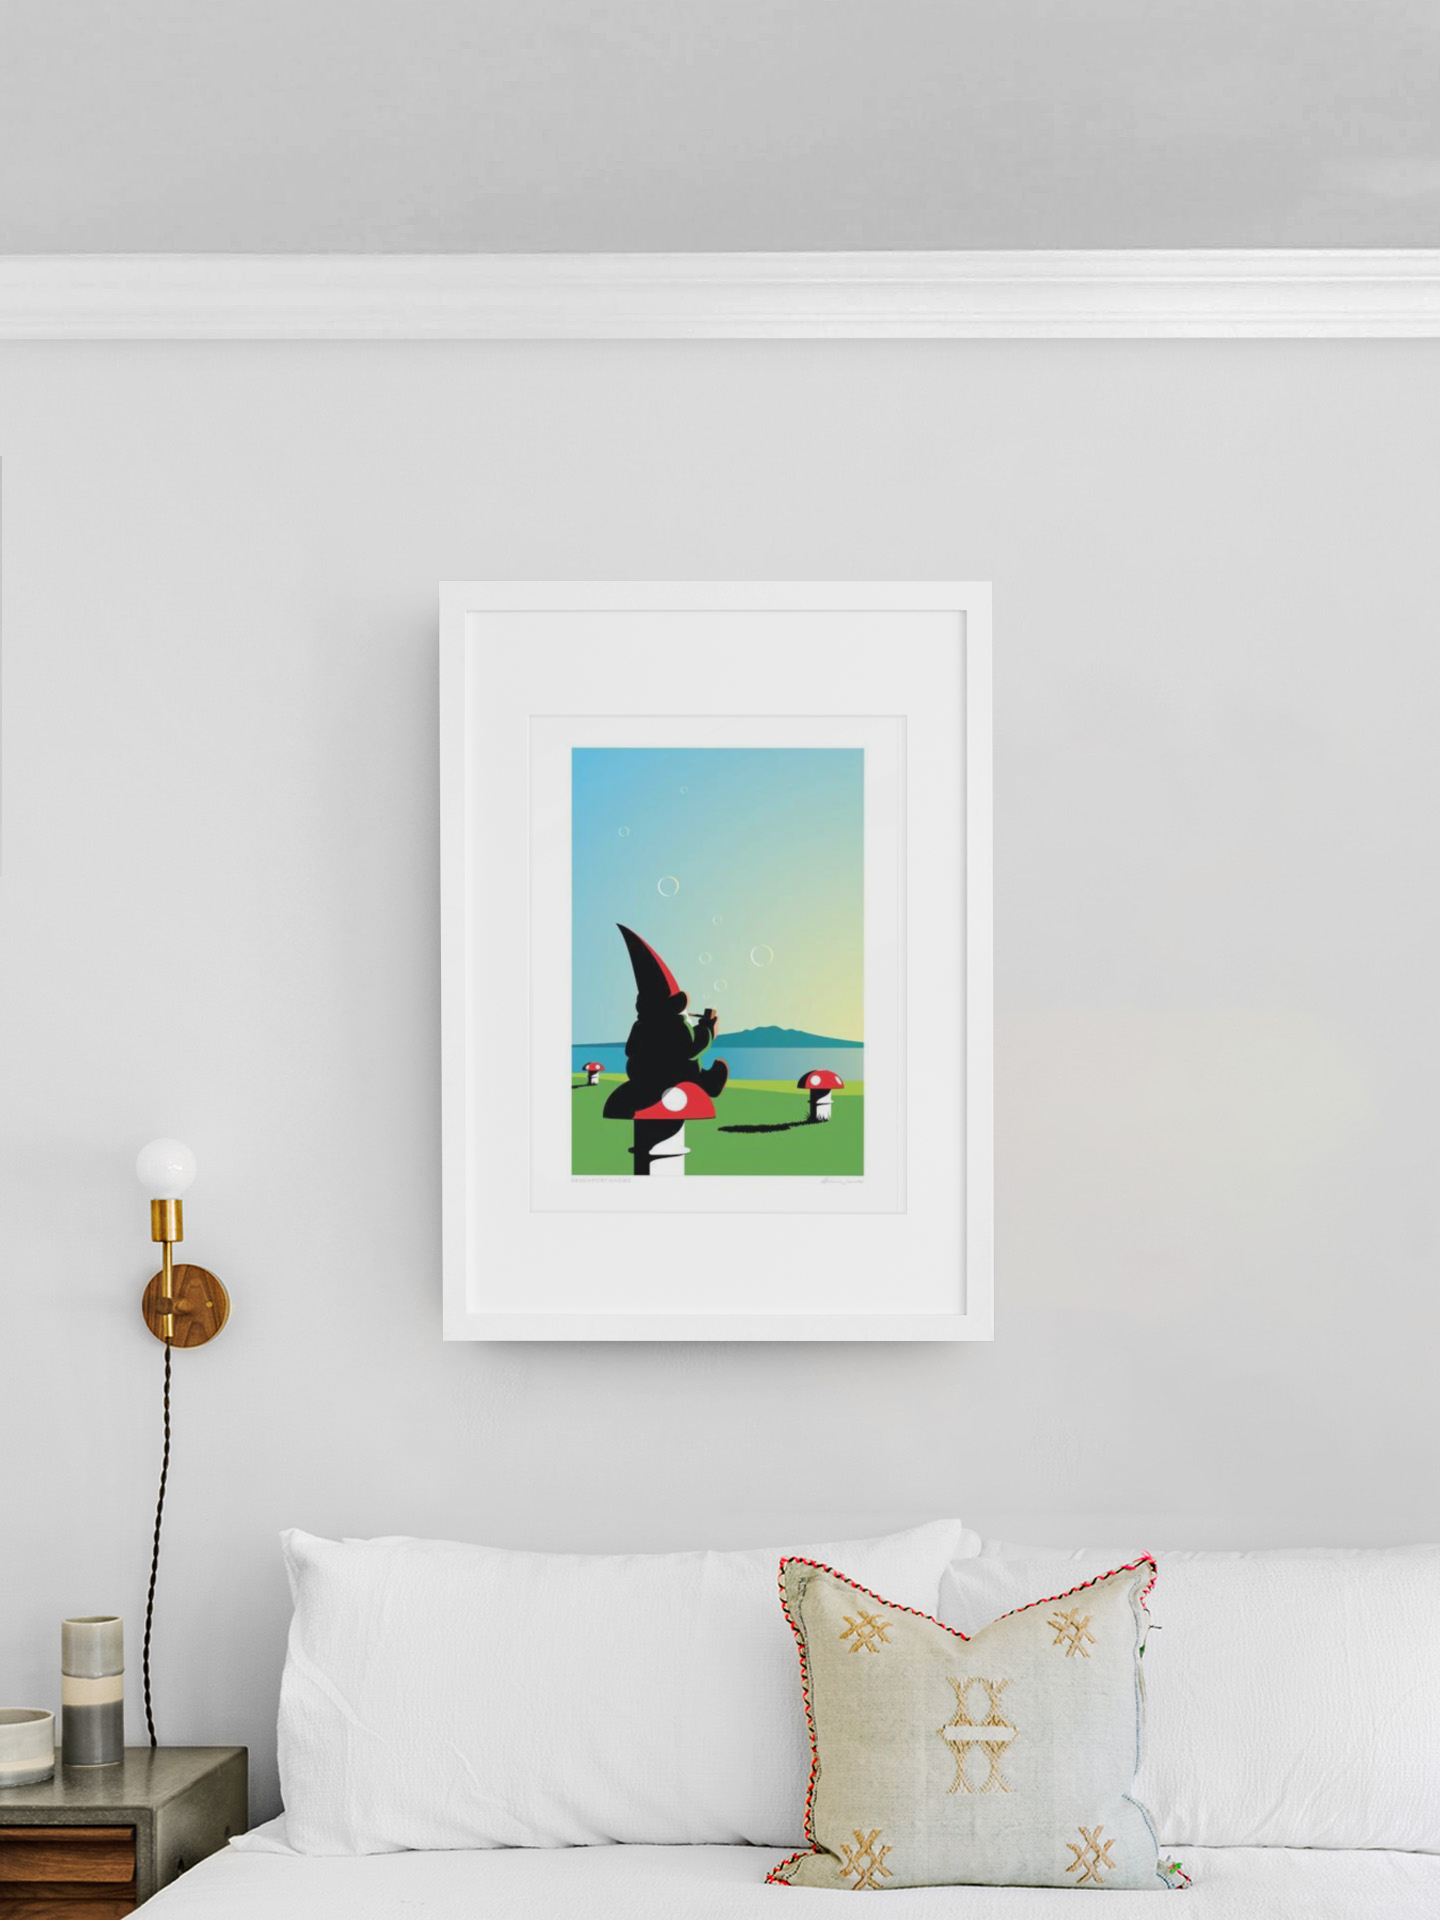 A Devonport Gnome art print by Glenn Jones hanging on a clean, white wall featuring a stylized cartoon character leaping between platforms against a sky-blue background, dotted with whimsical mushroom houses and playful local gnomes.